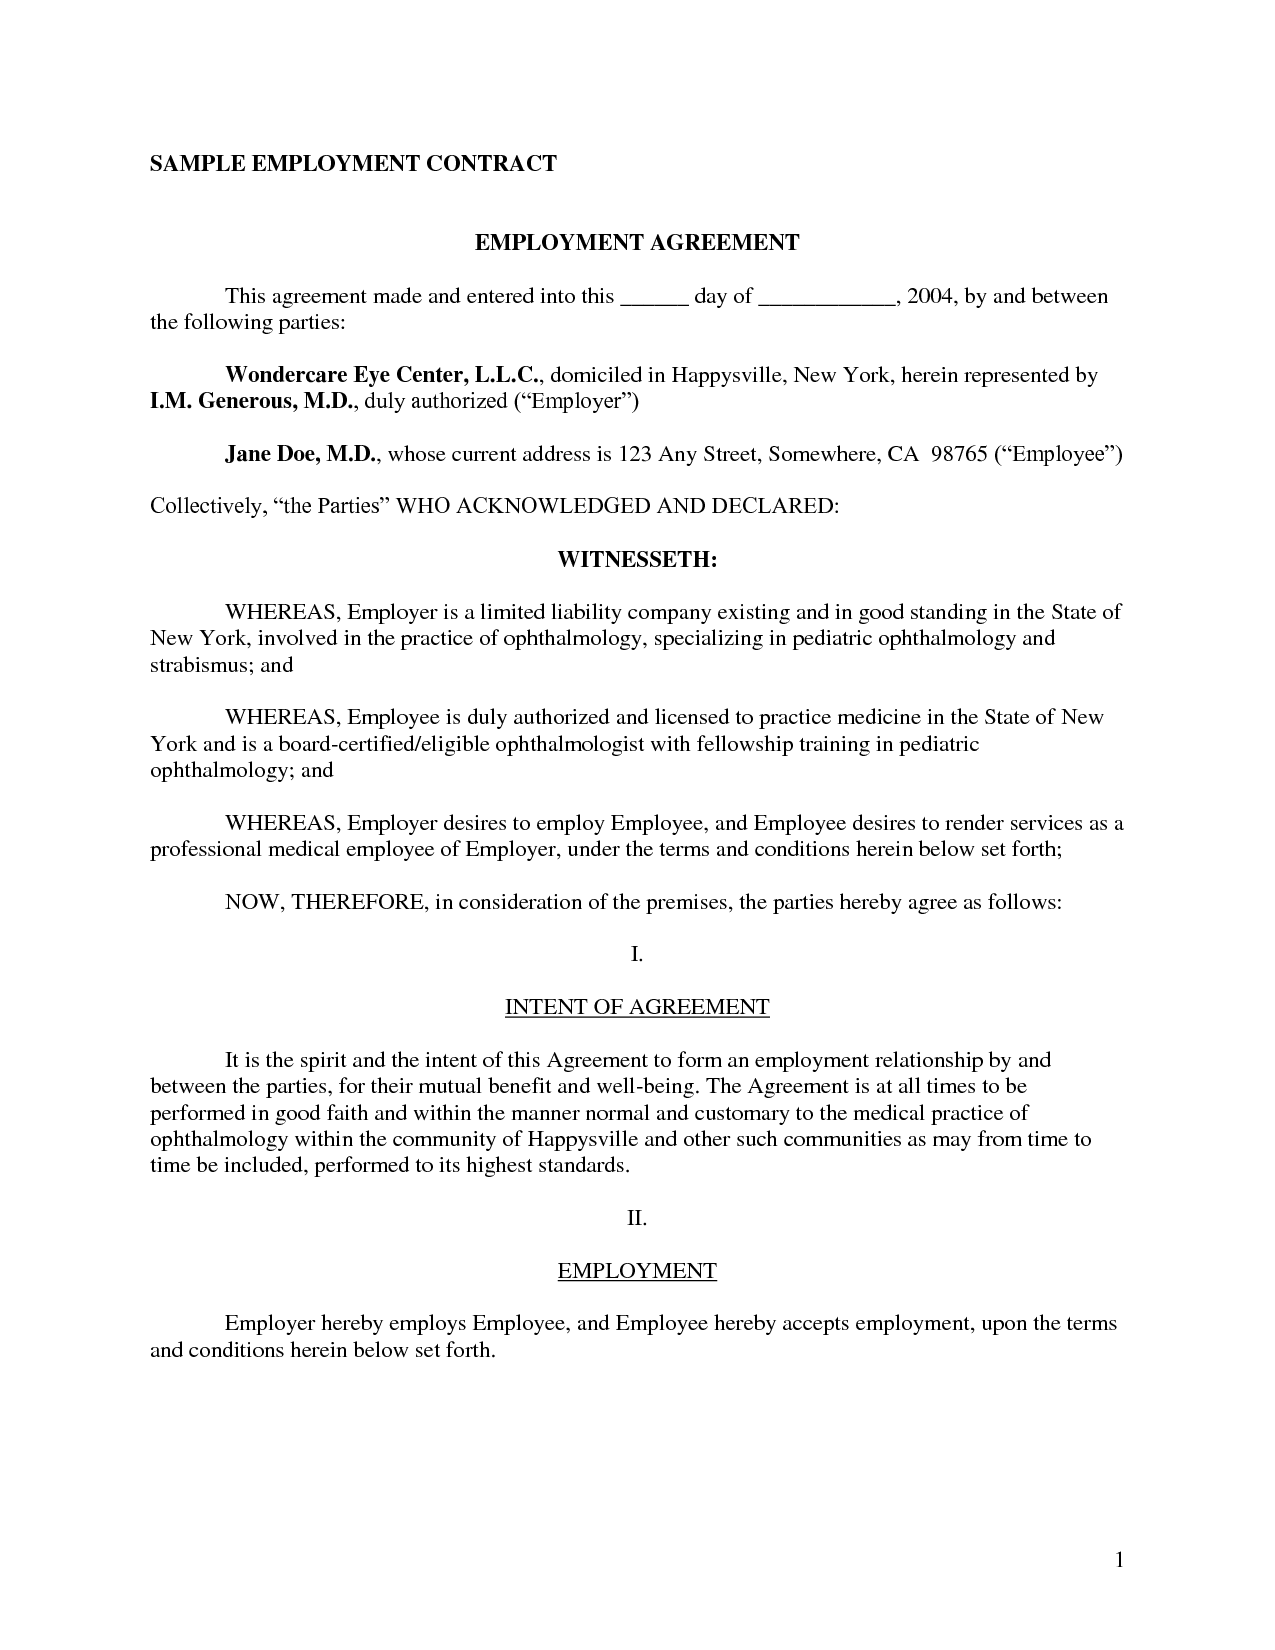 employment-contract-agreement-sample-free-printable-documents